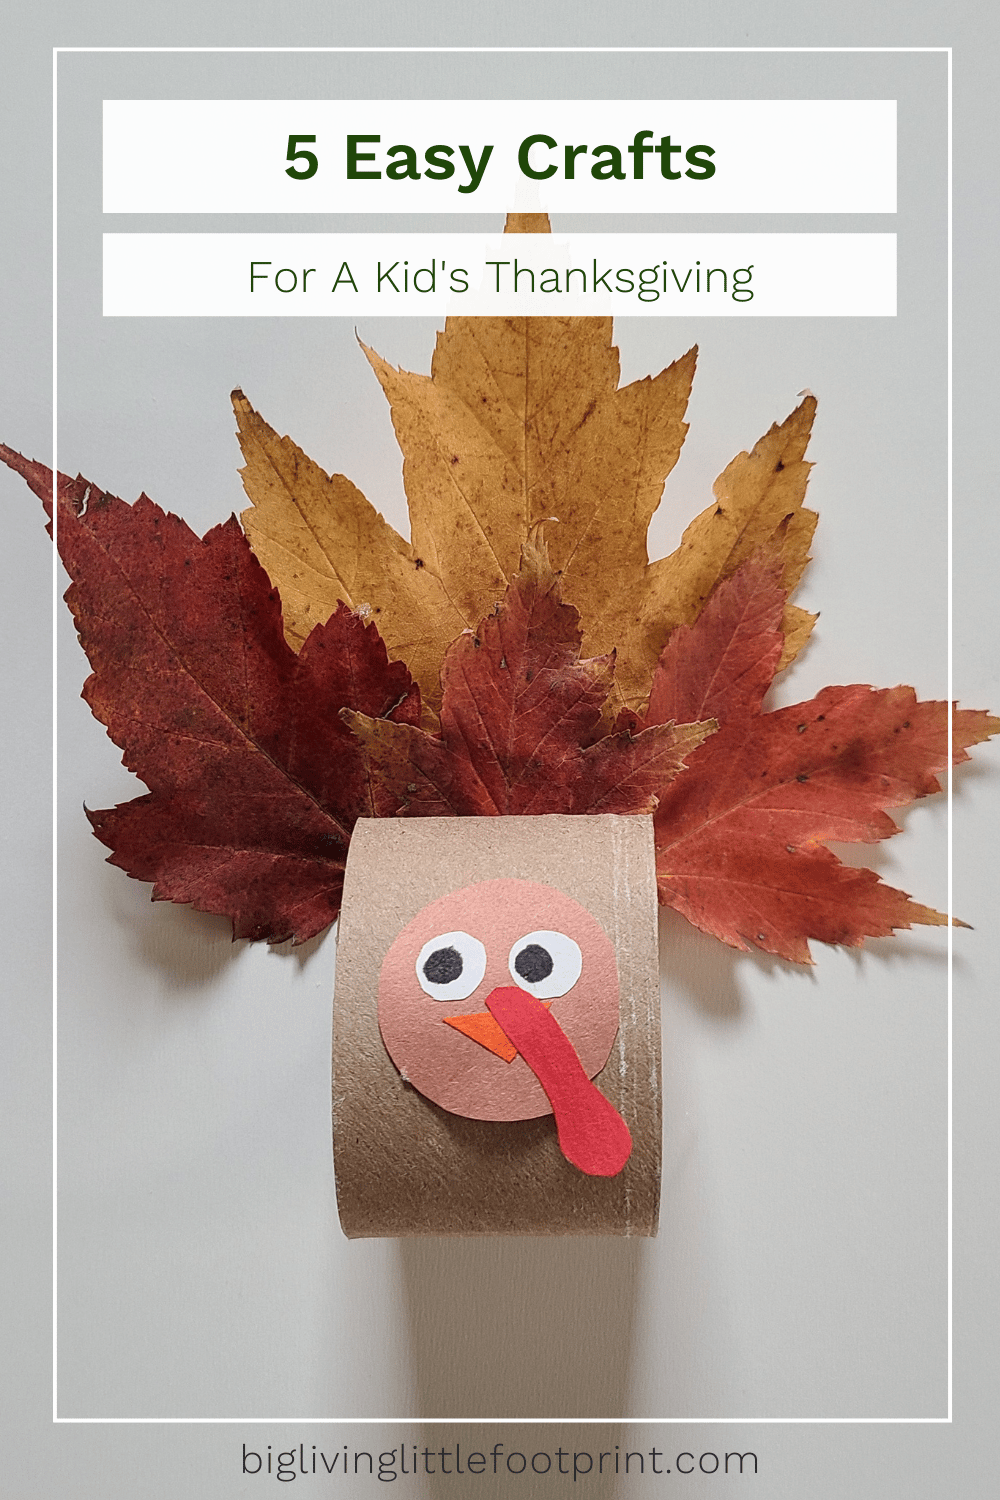 5 Thanksgiving Crafts for Kids